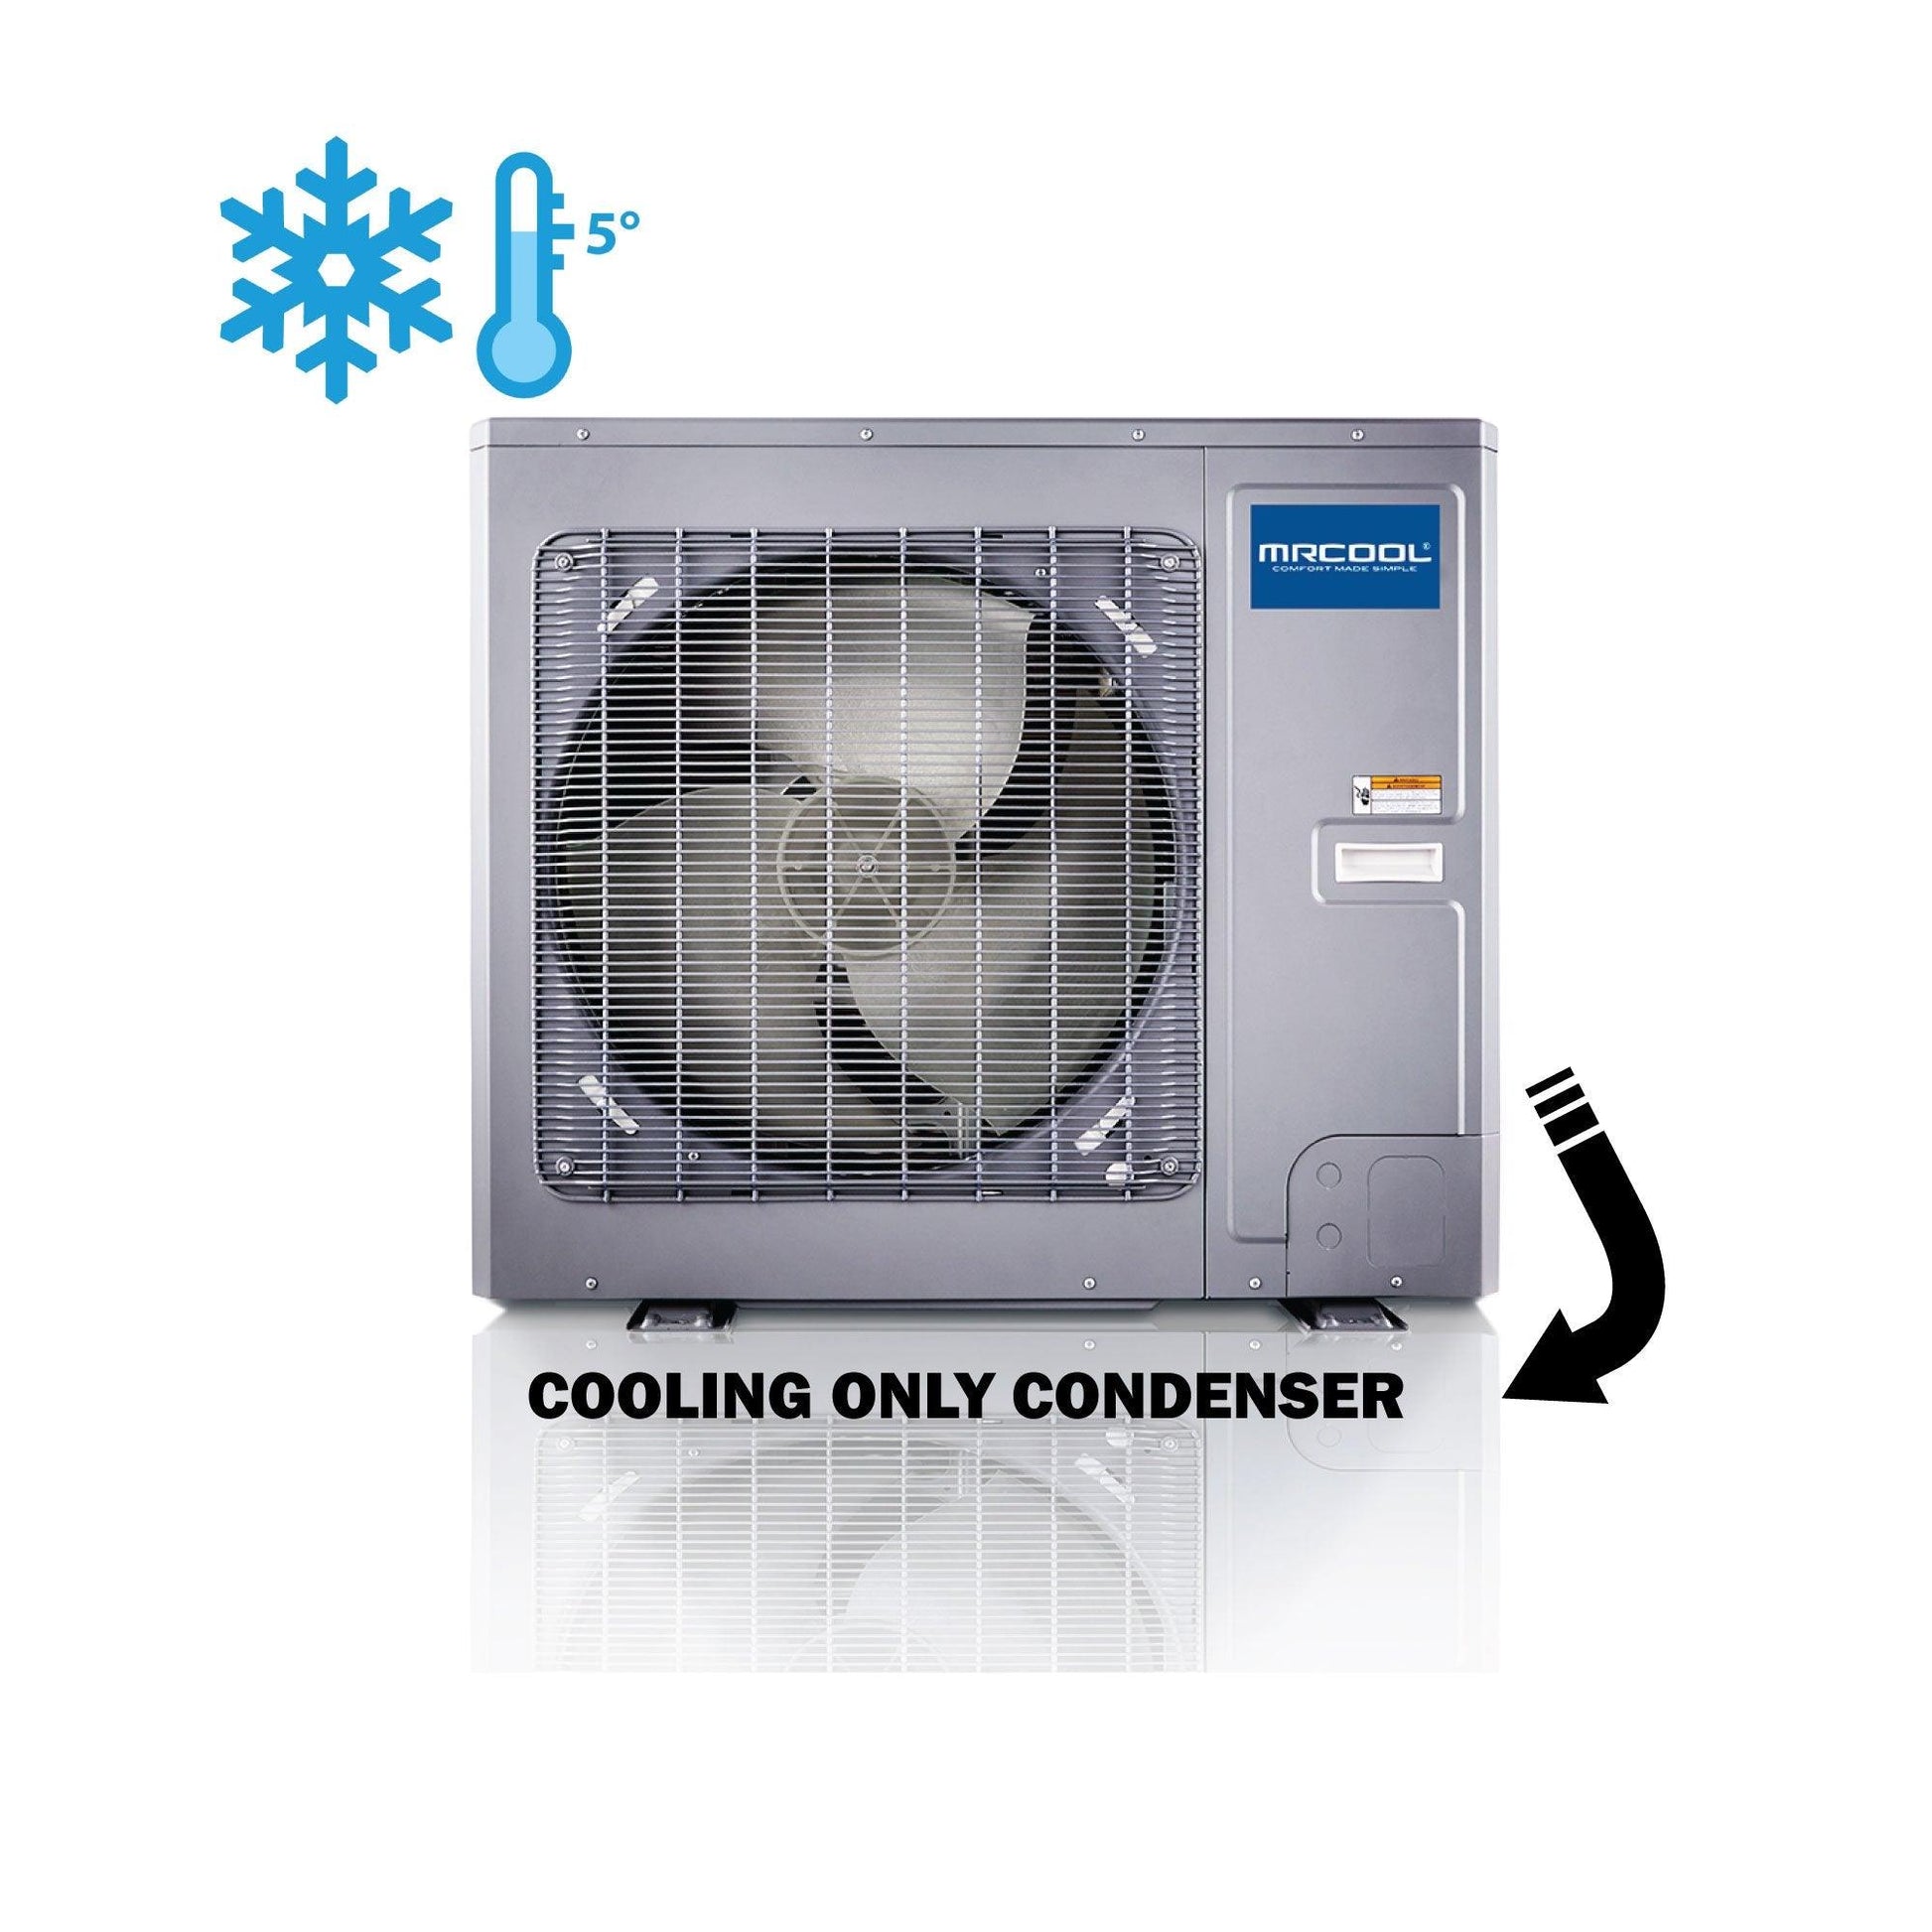 Cooling only condenser 1